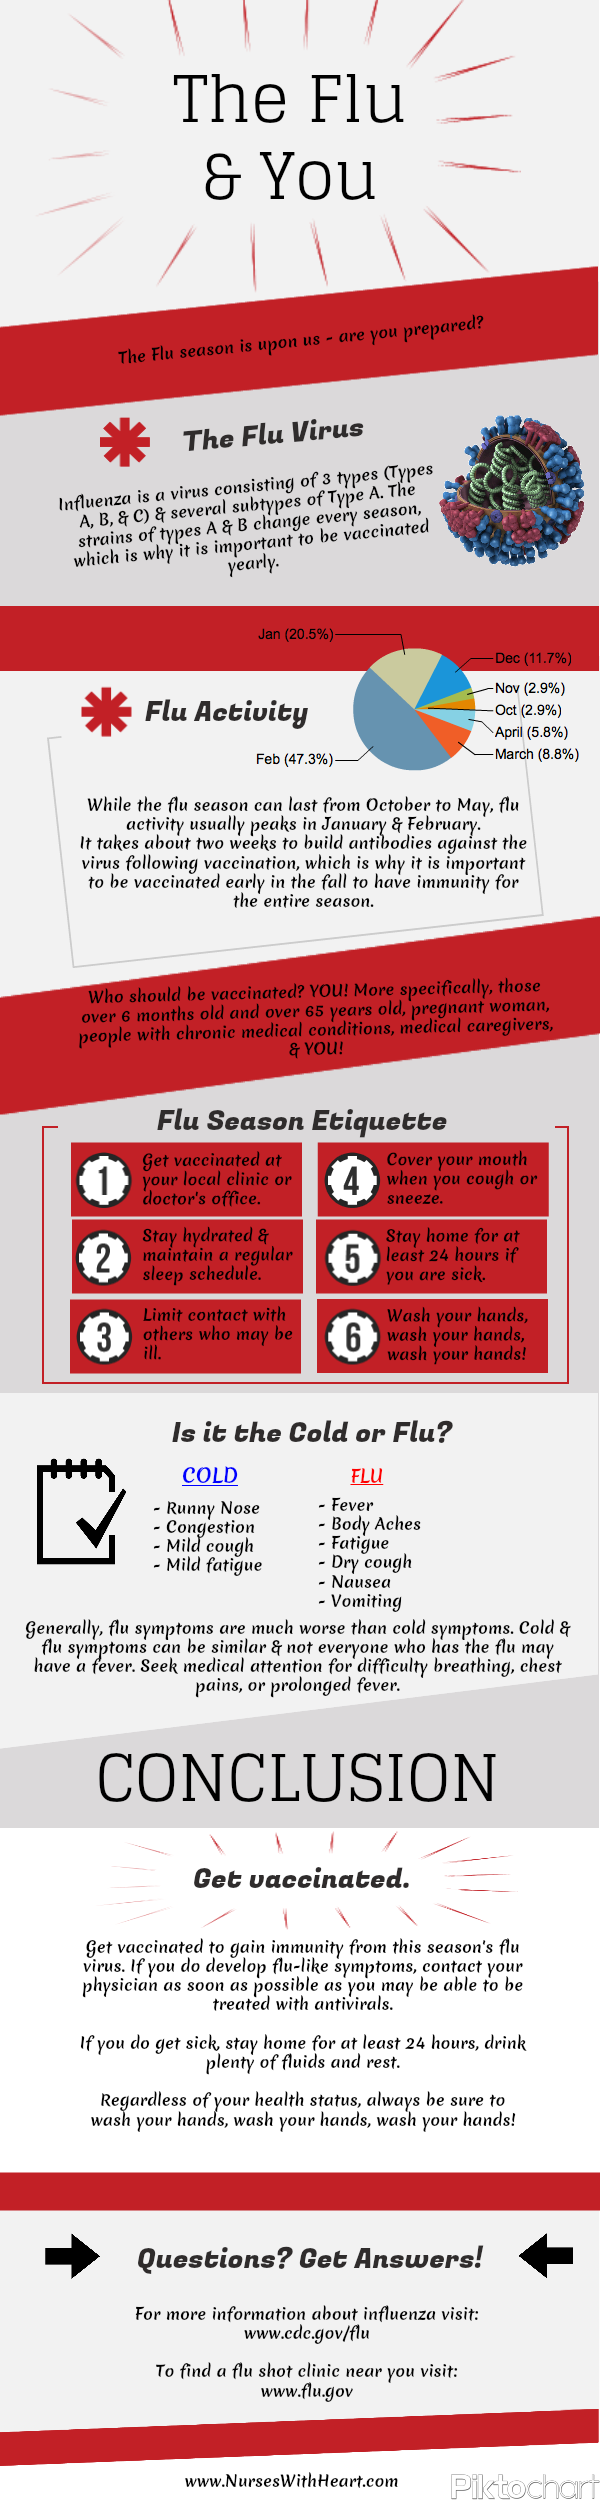 The Flu and You 